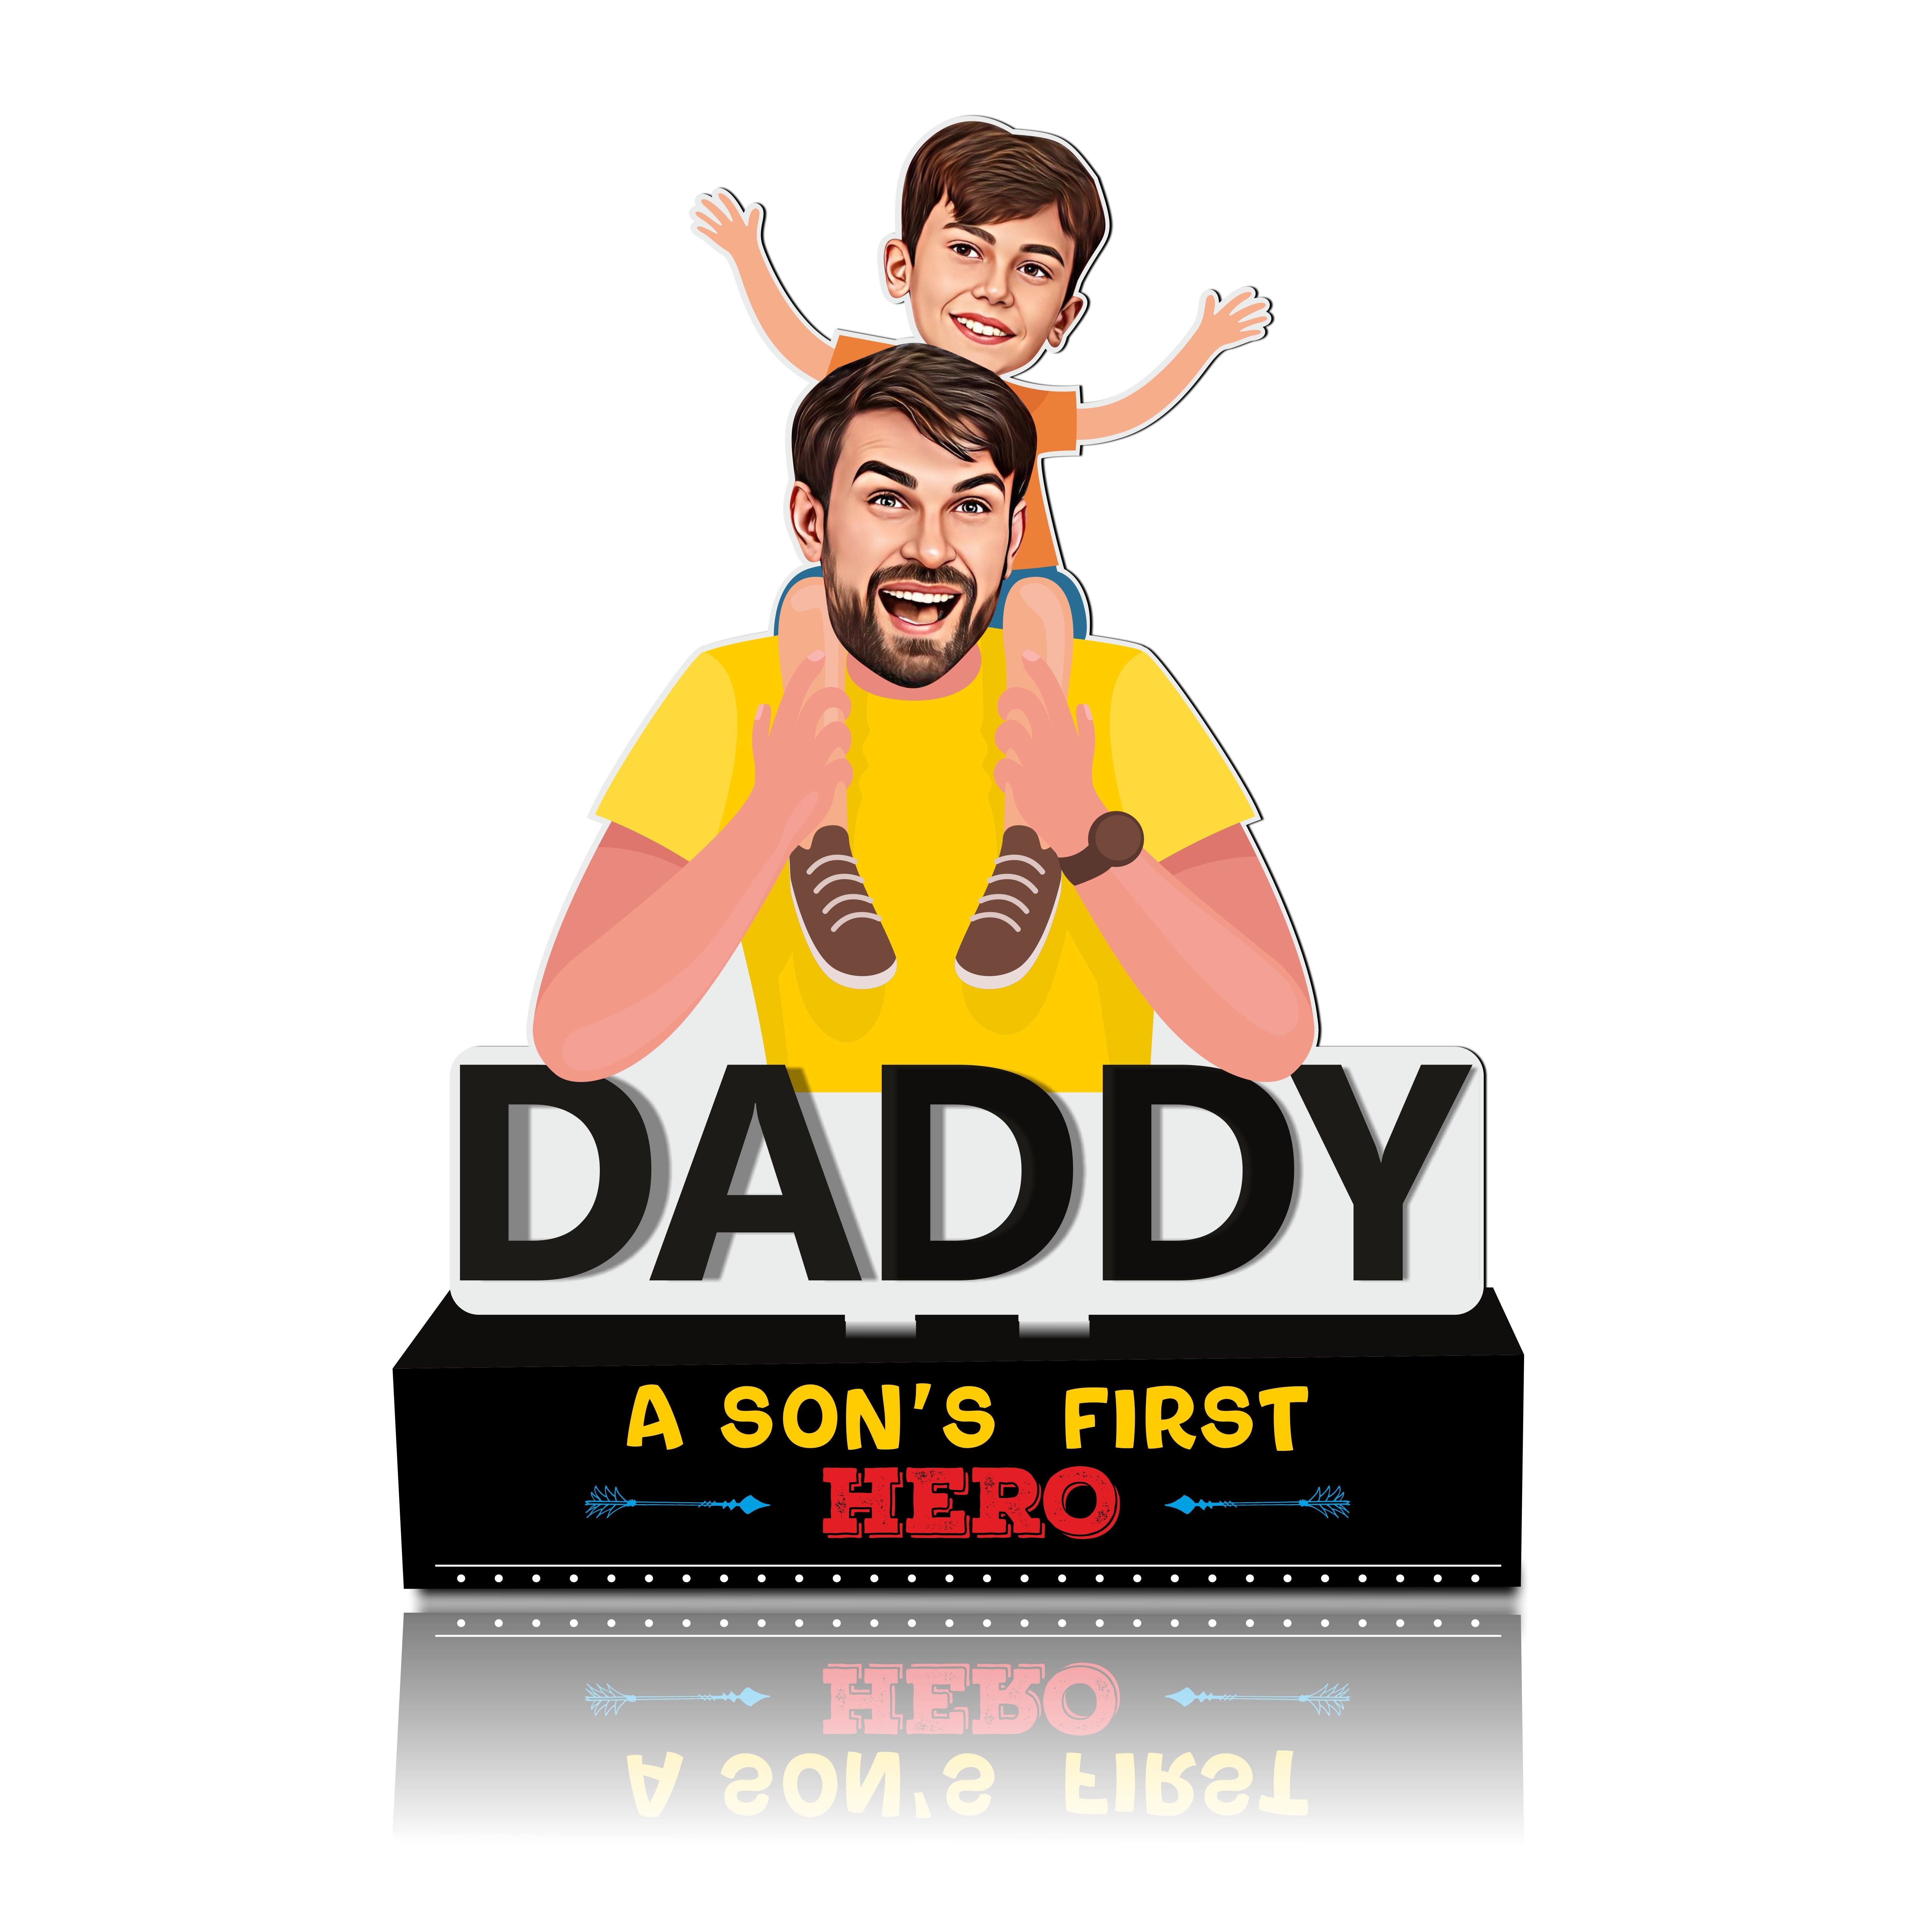 First hero dad – Father’s Day Caricature Gift